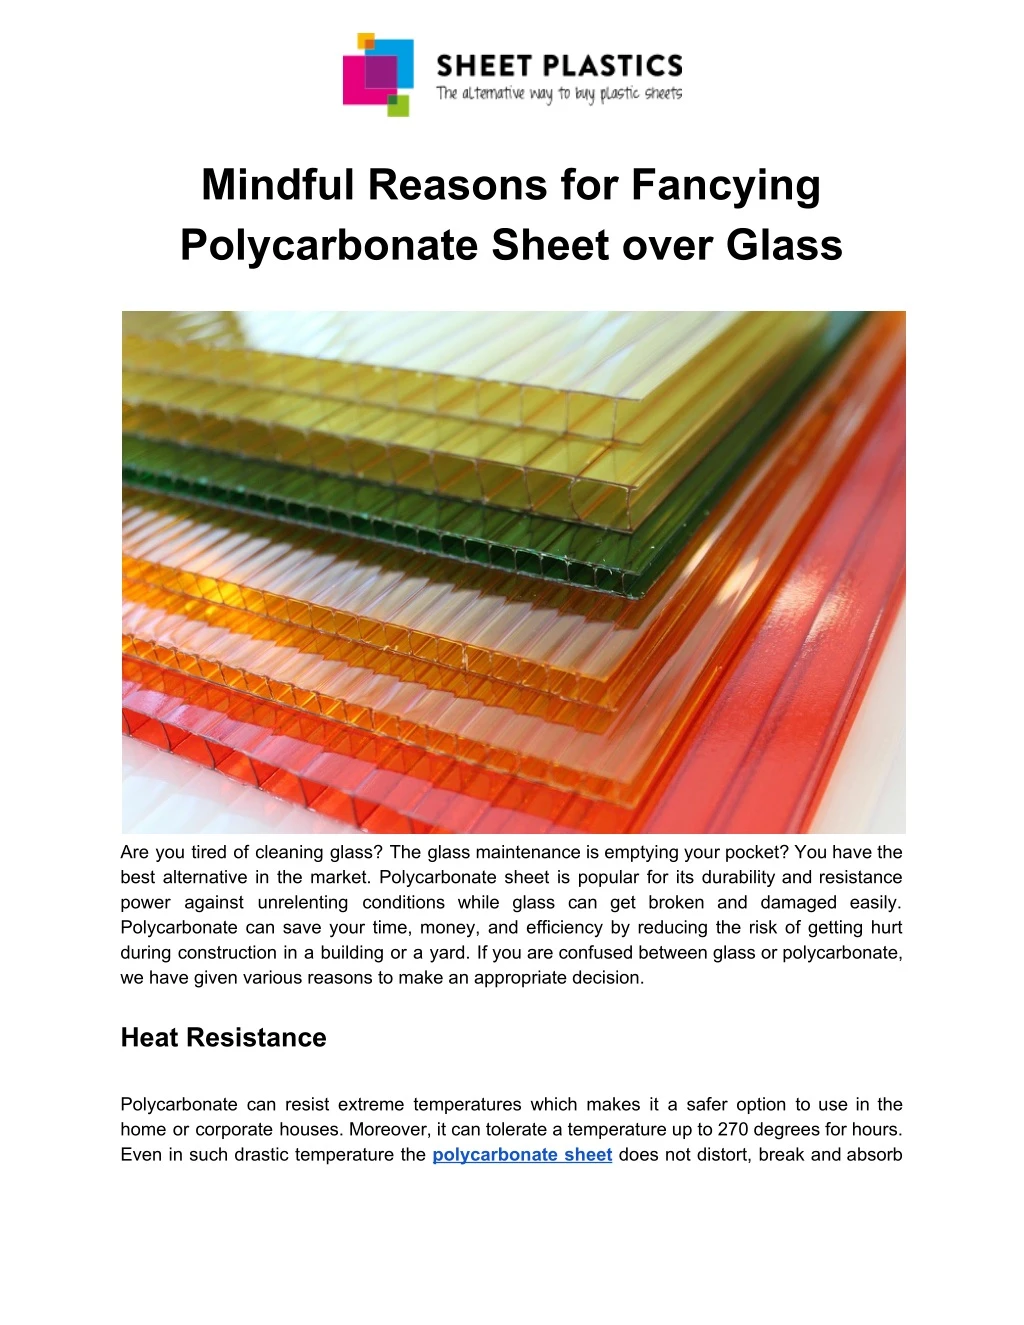 mindful reasons for fancying polycarbonate sheet